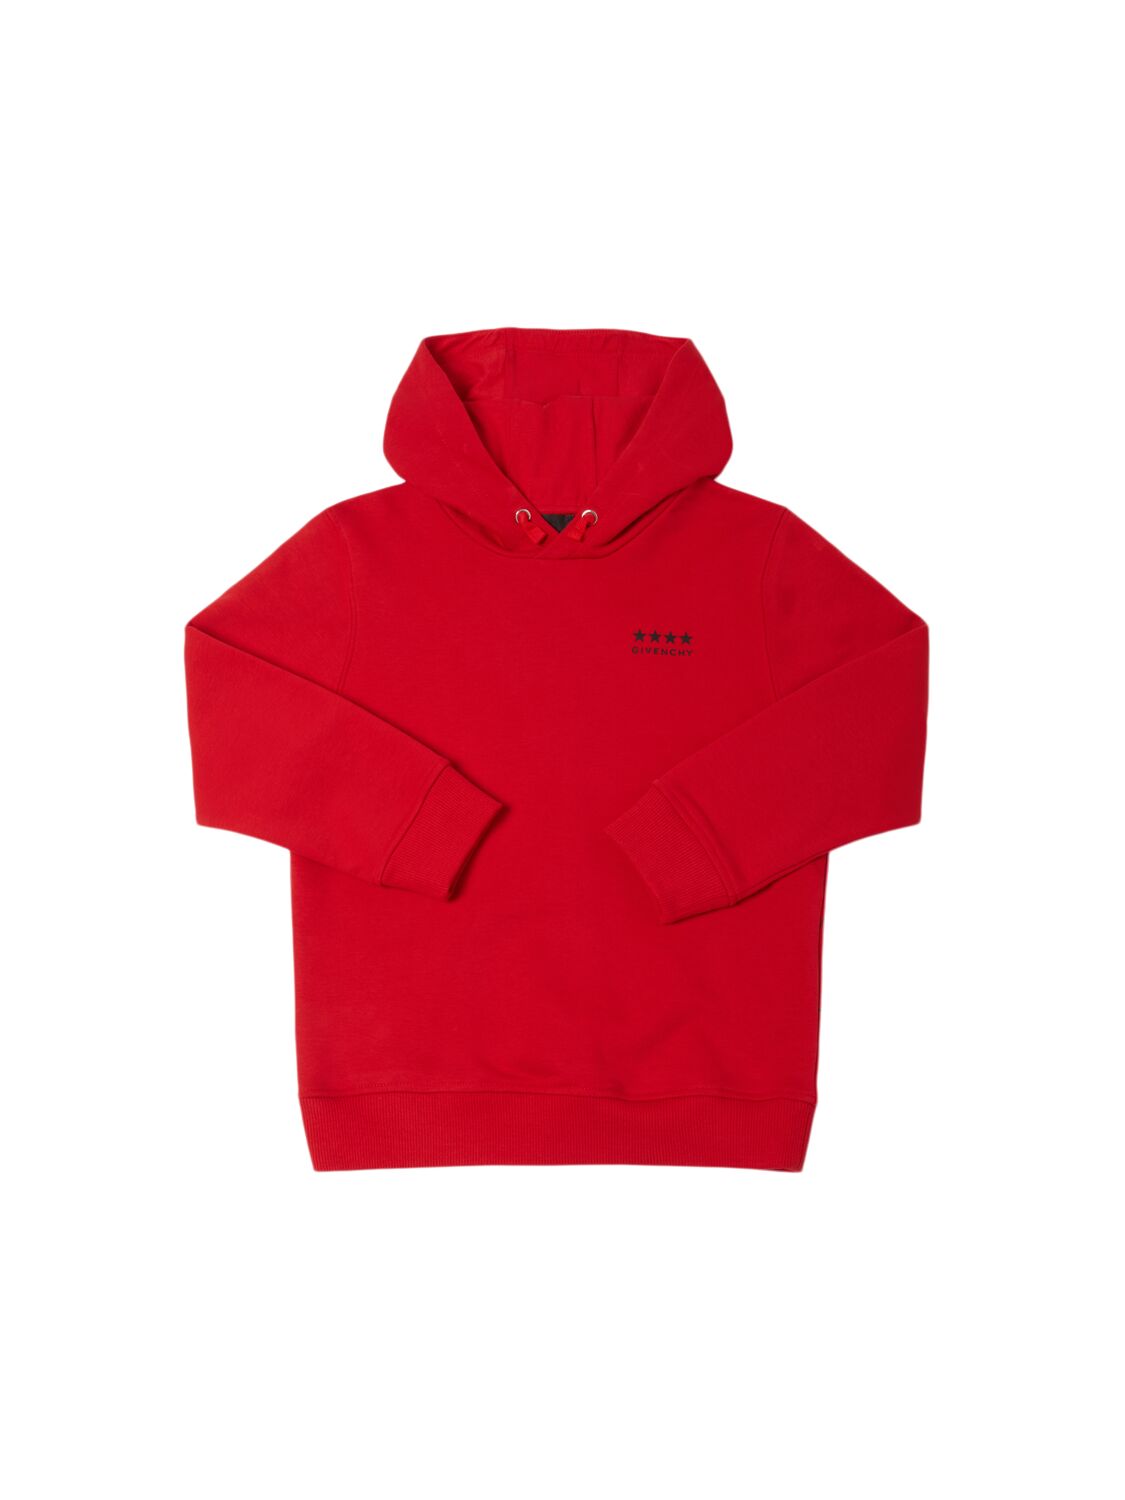 Givenchy Cotton Blend Hooded Sweatshirt In Red